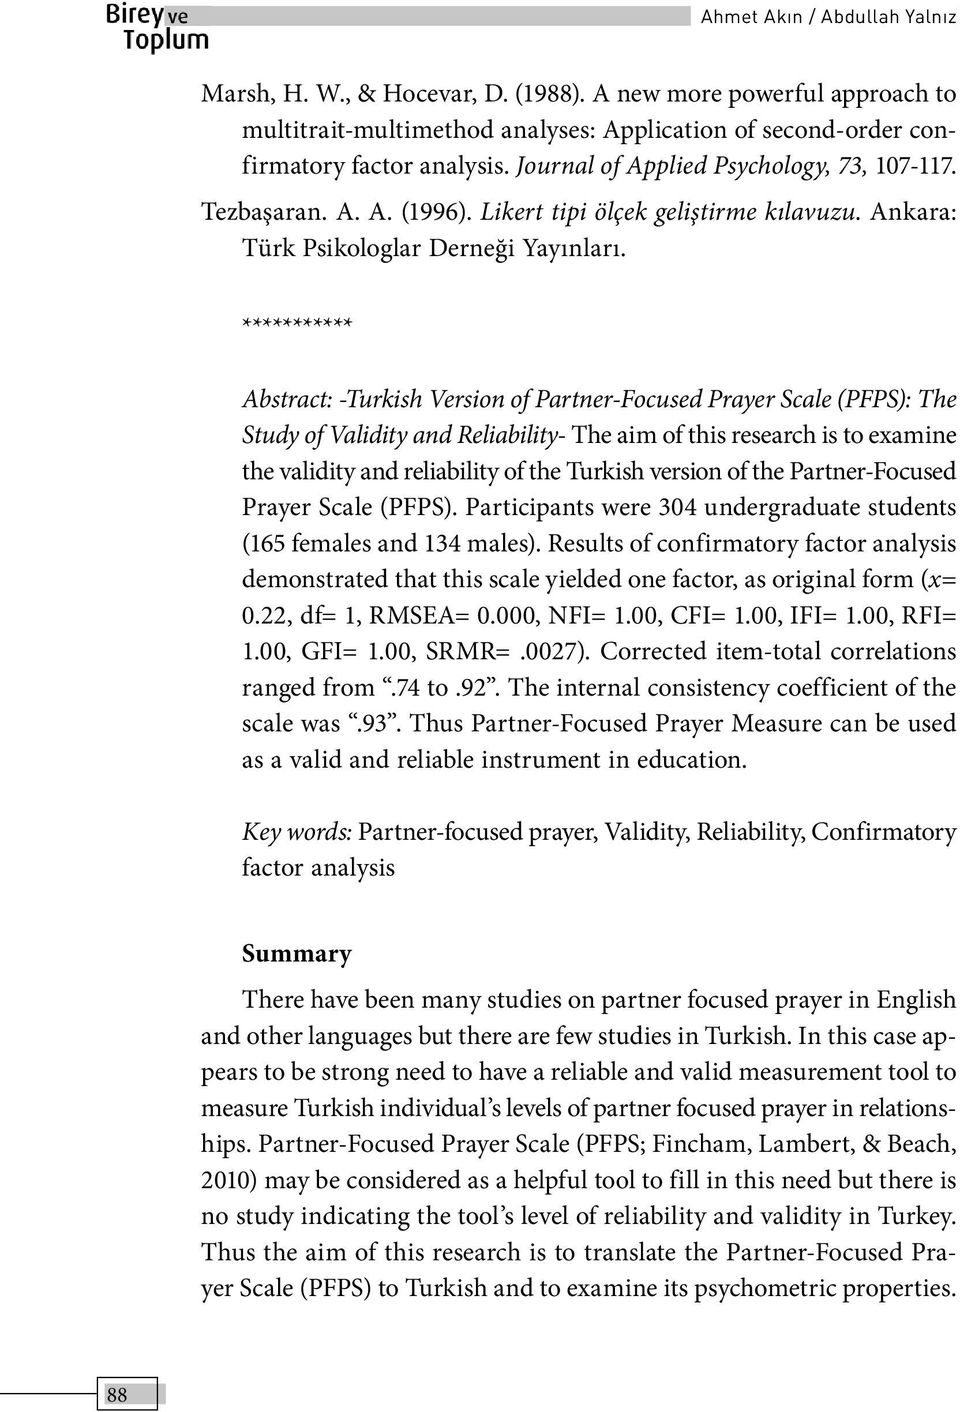 *********** Abstract: -Turkish Version of Partner-Focused Prayer Scale (PFPS): The Study of Validity and Reliability- The aim of this research is to examine the validity and reliability of the